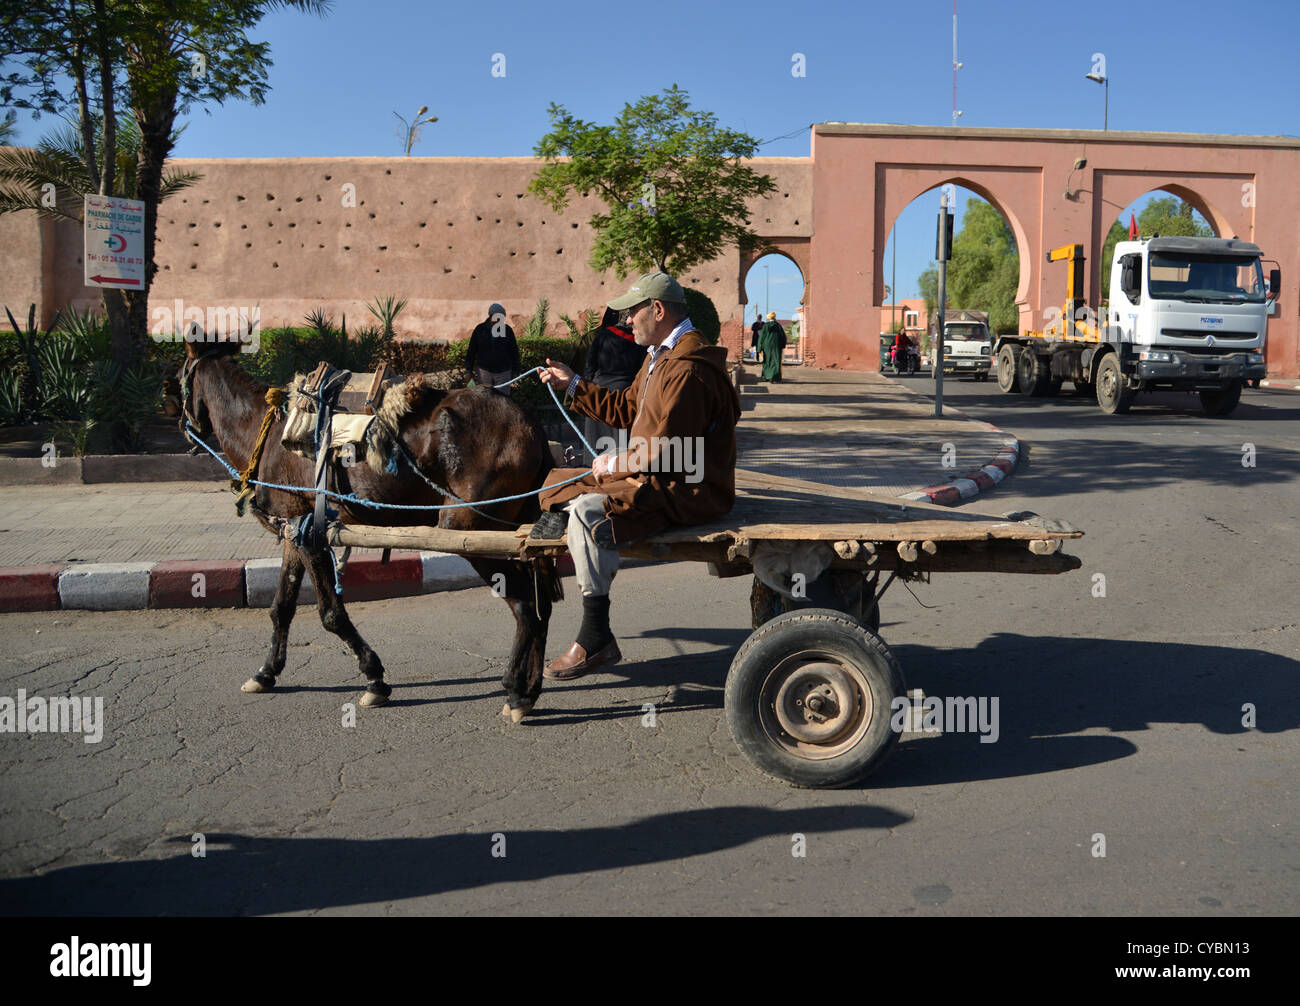 Man drivign a donkey cart on the streets of Marakesh, Morocco (Marakech), a modern truck in the background Stock Photo